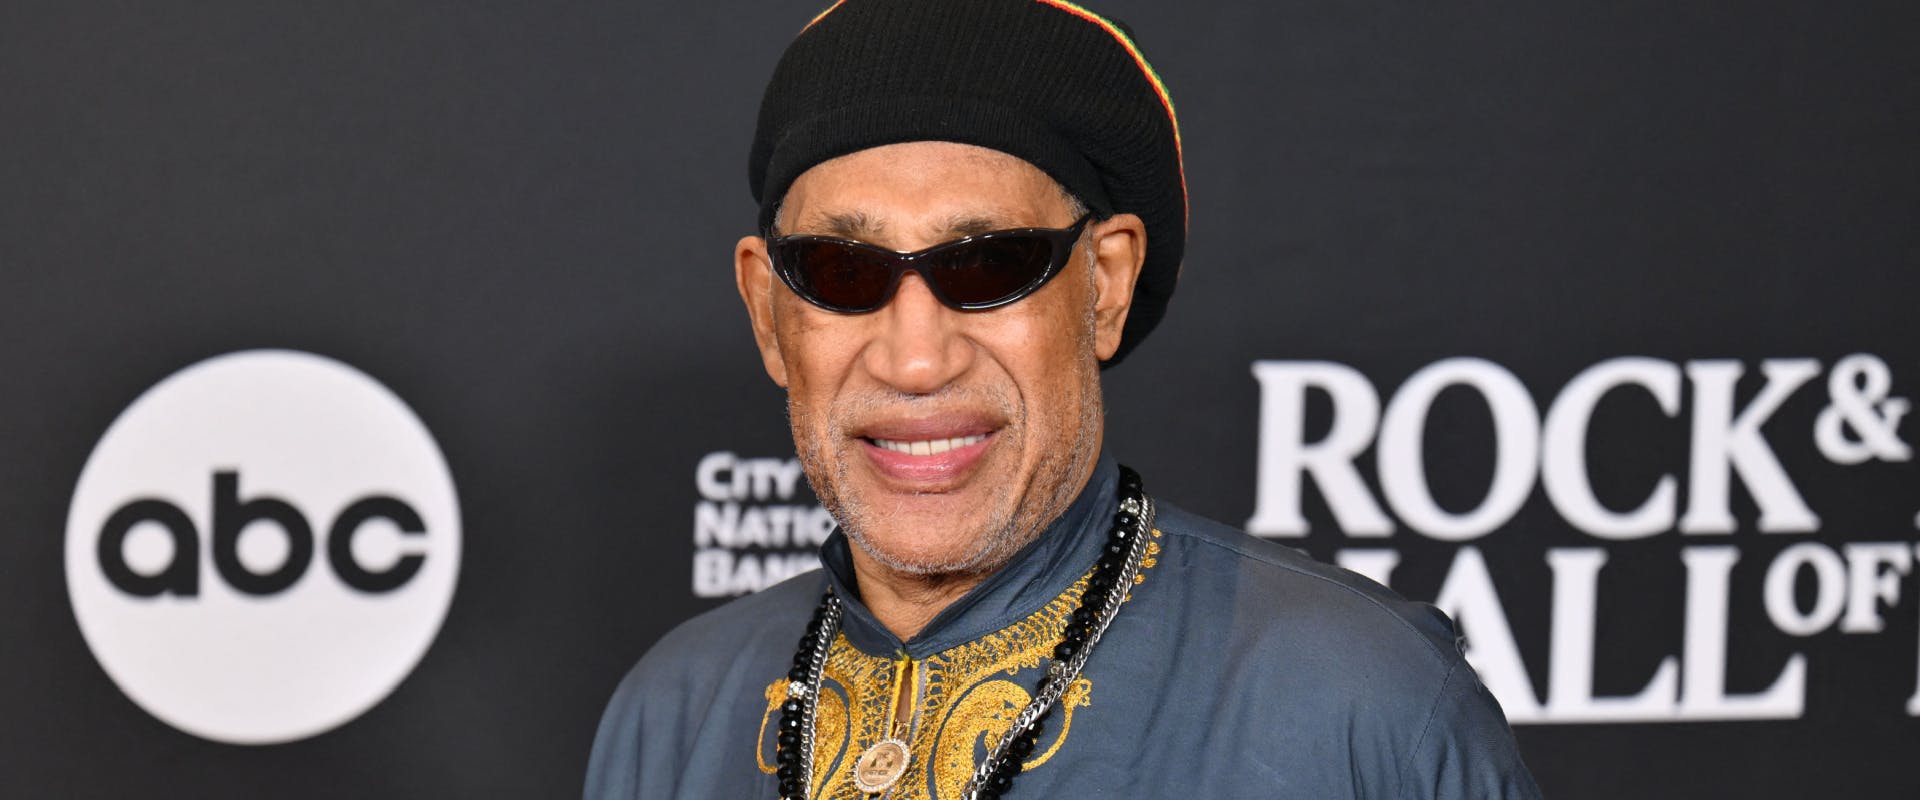 Jamaican-US DJ Kool Herc arrives for the 38th Annual Rock & Roll Hall of Fame Induction Ceremony at Barclays Center in the Brooklyn borough of New York City, on November 3, 2023. (Photo by ANGELA WEISS / AFP) (Photo by ANGELA WEISS/AFP via Getty Images)